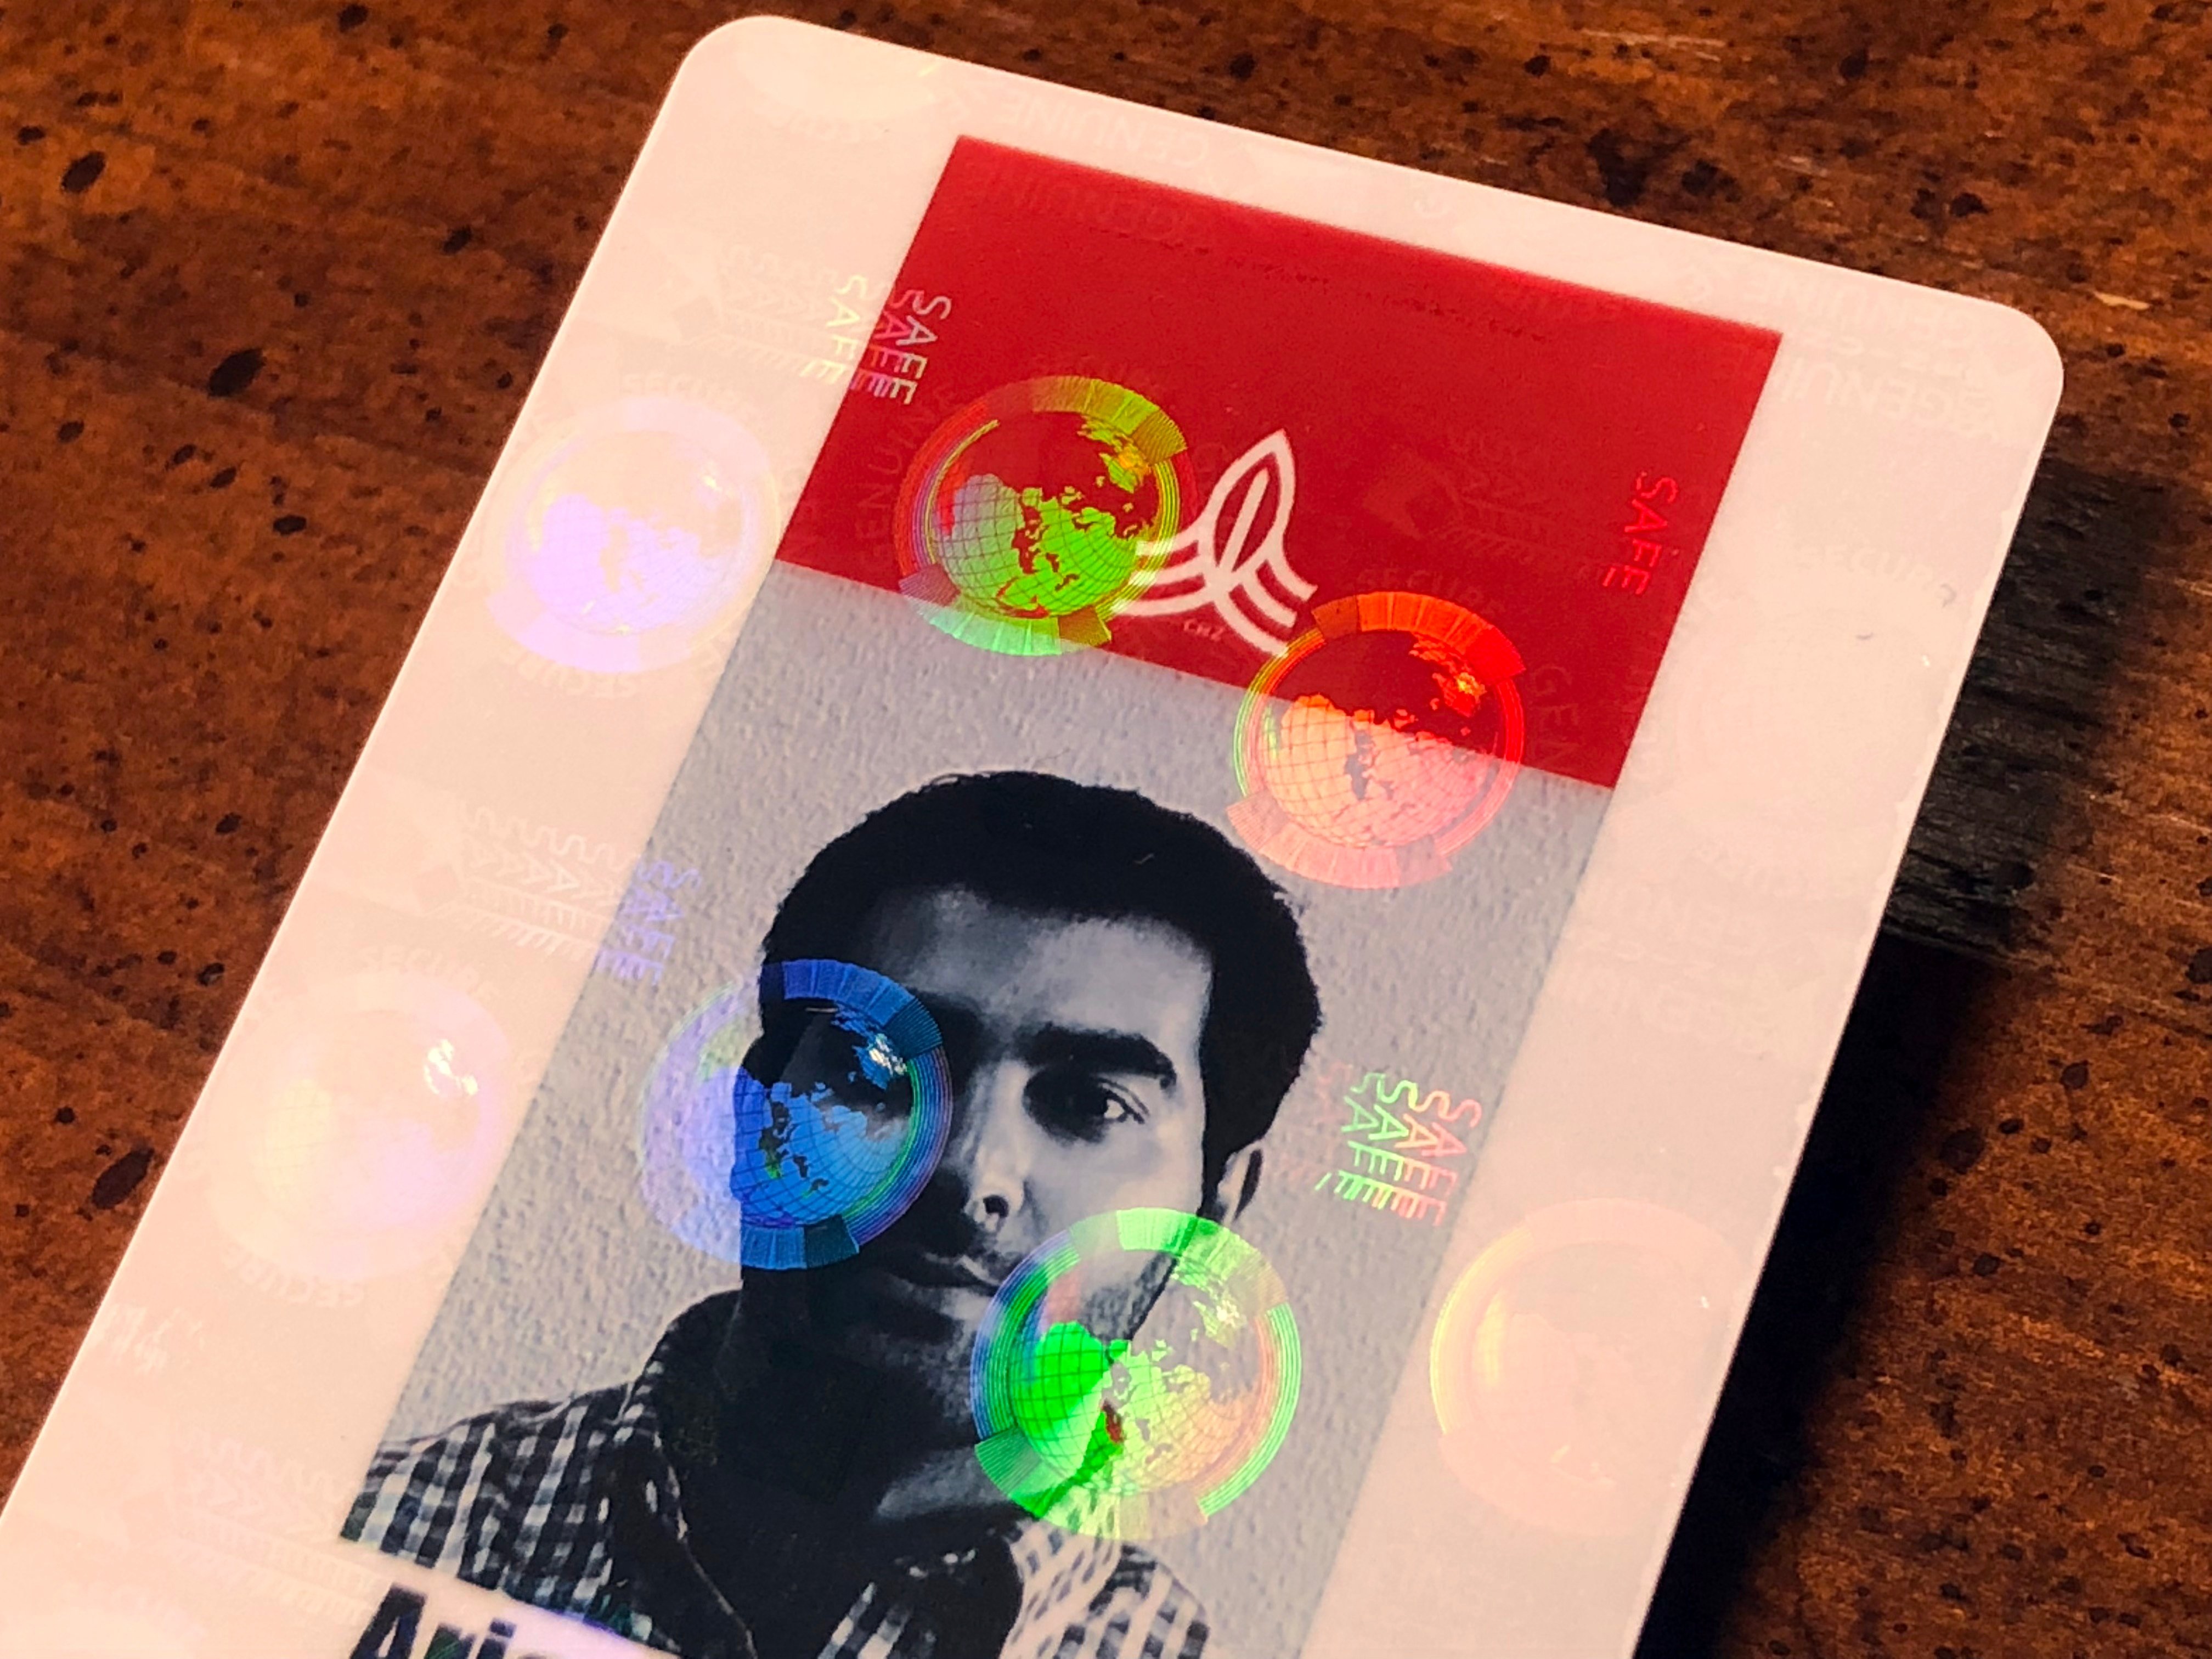 ID Badge Security: Hologram, Foil Stamps & Watermarks